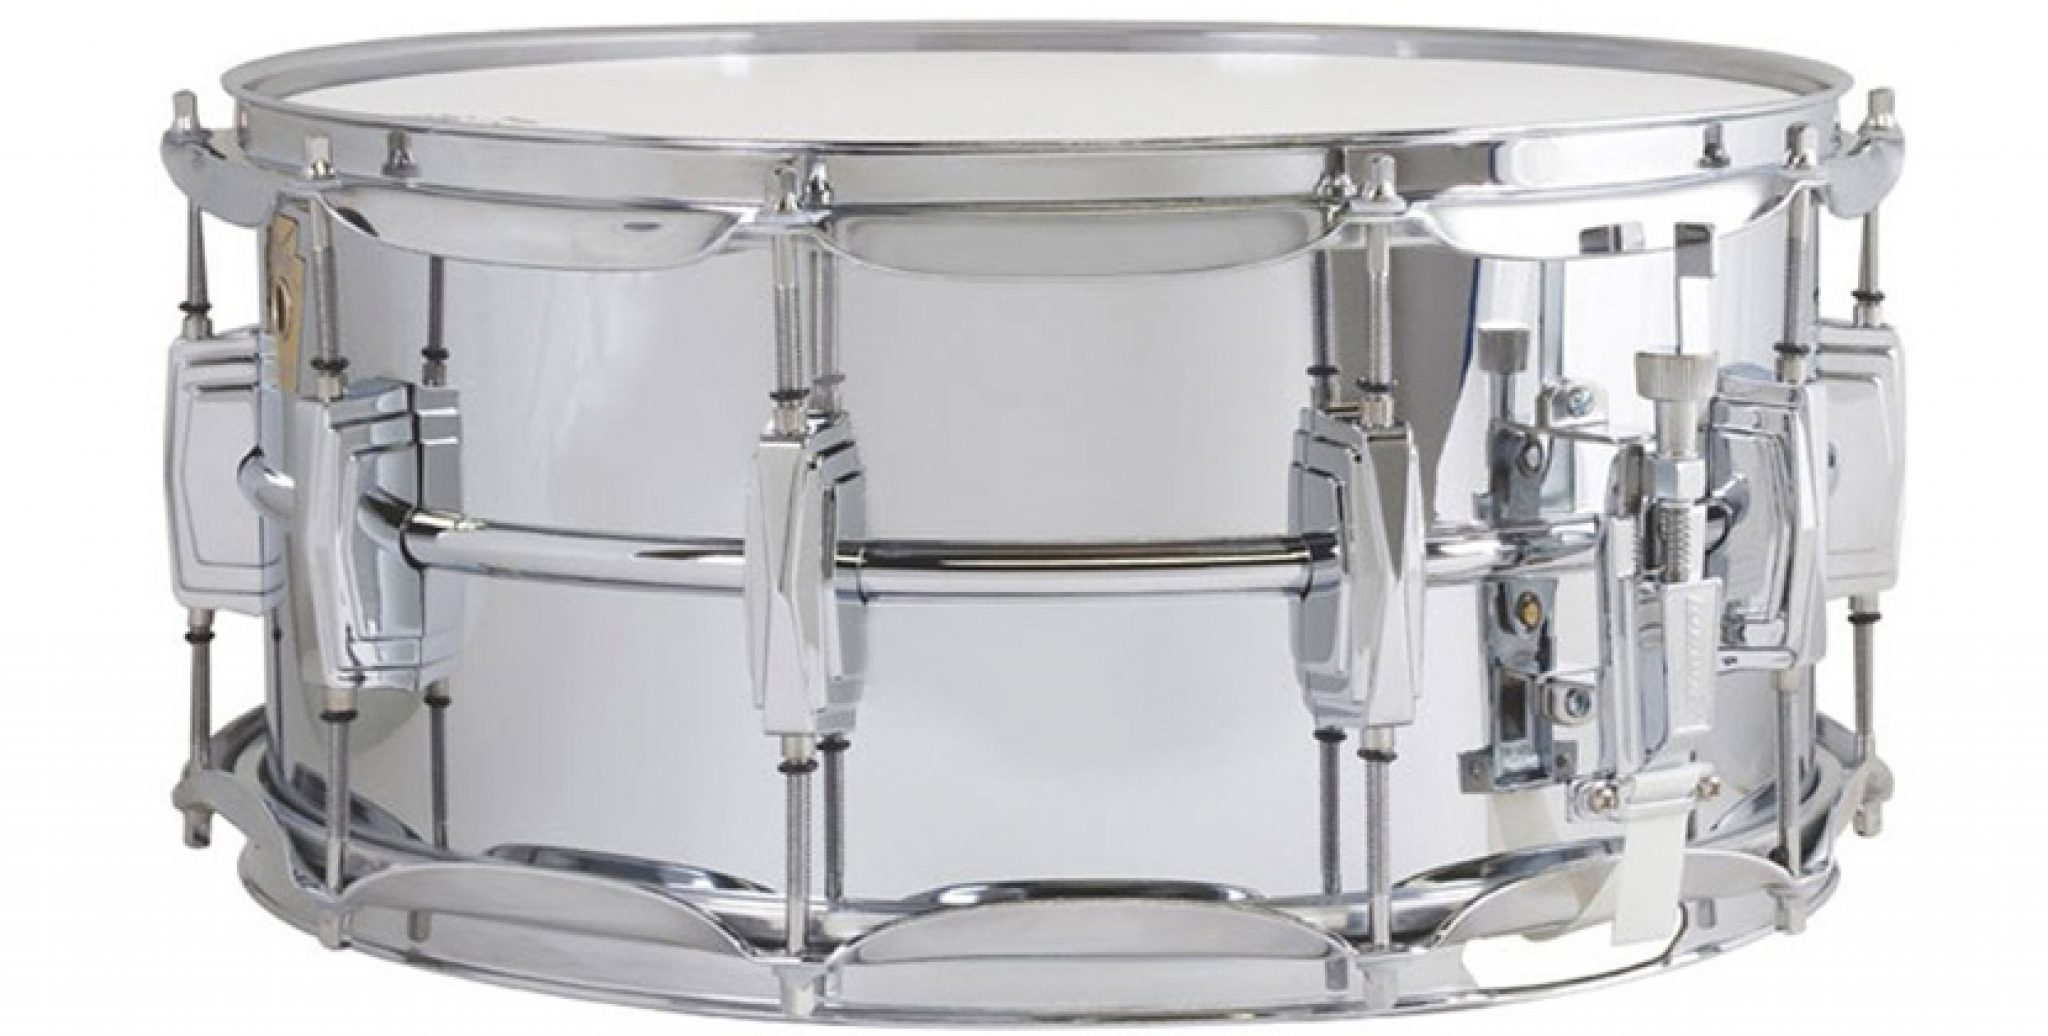 Ludwig LM402 Snare Drum Review - Loud Beats